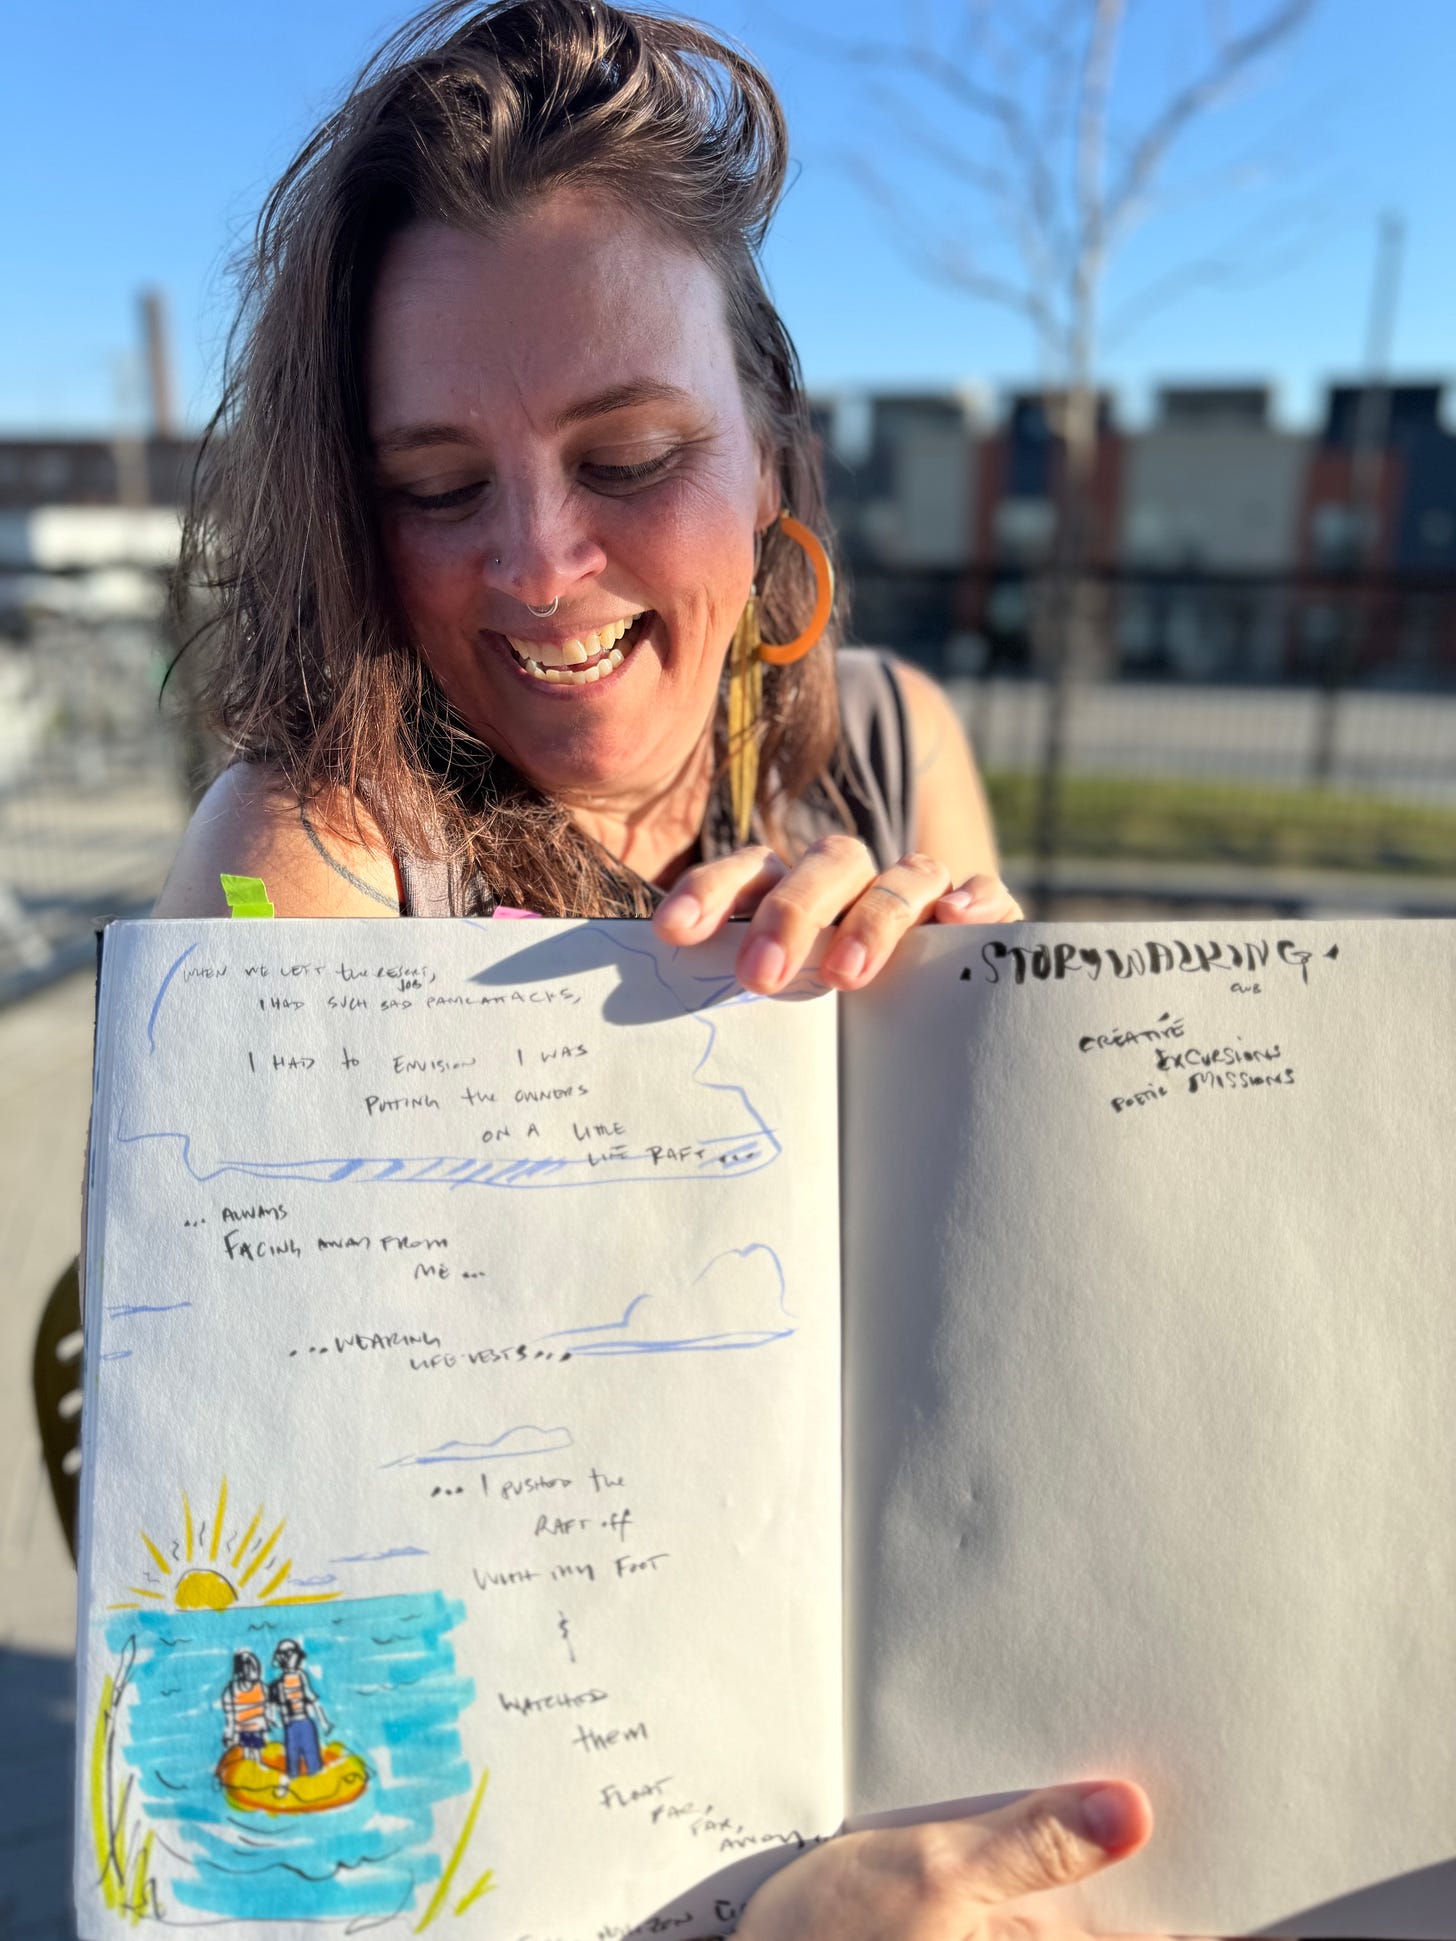 artist lisette murphy holds up her sketchbook and laughs. there is writing and a drawing of a yellow raft on blue water.